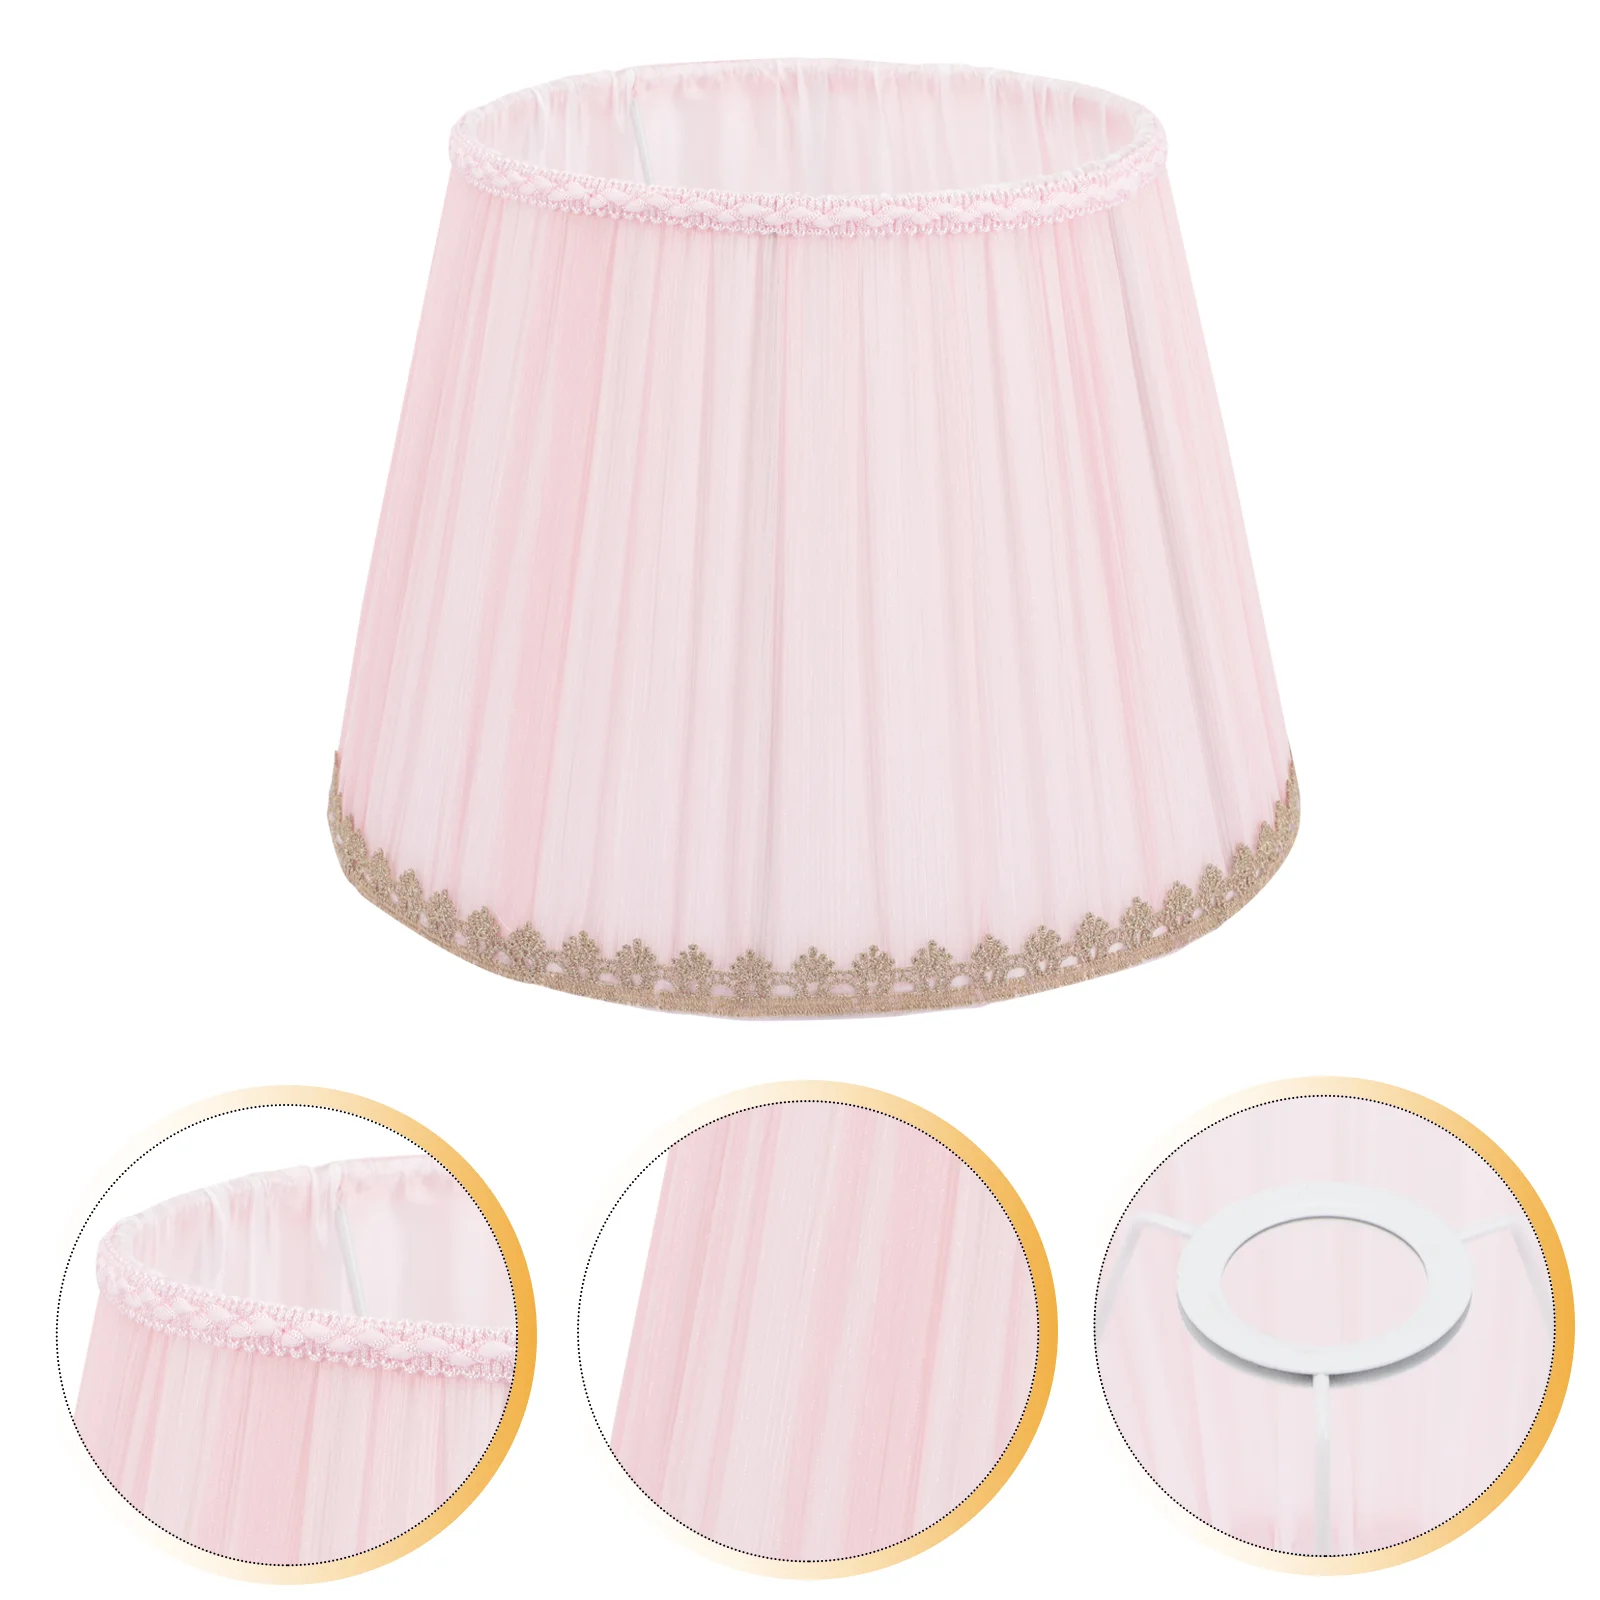 Lamp Shade Shades Chandelier Cover Light Lampshade Table Drum Ceiling Barrel Desk Wall Covers Floor Fabric Bulb Clip On Pleat